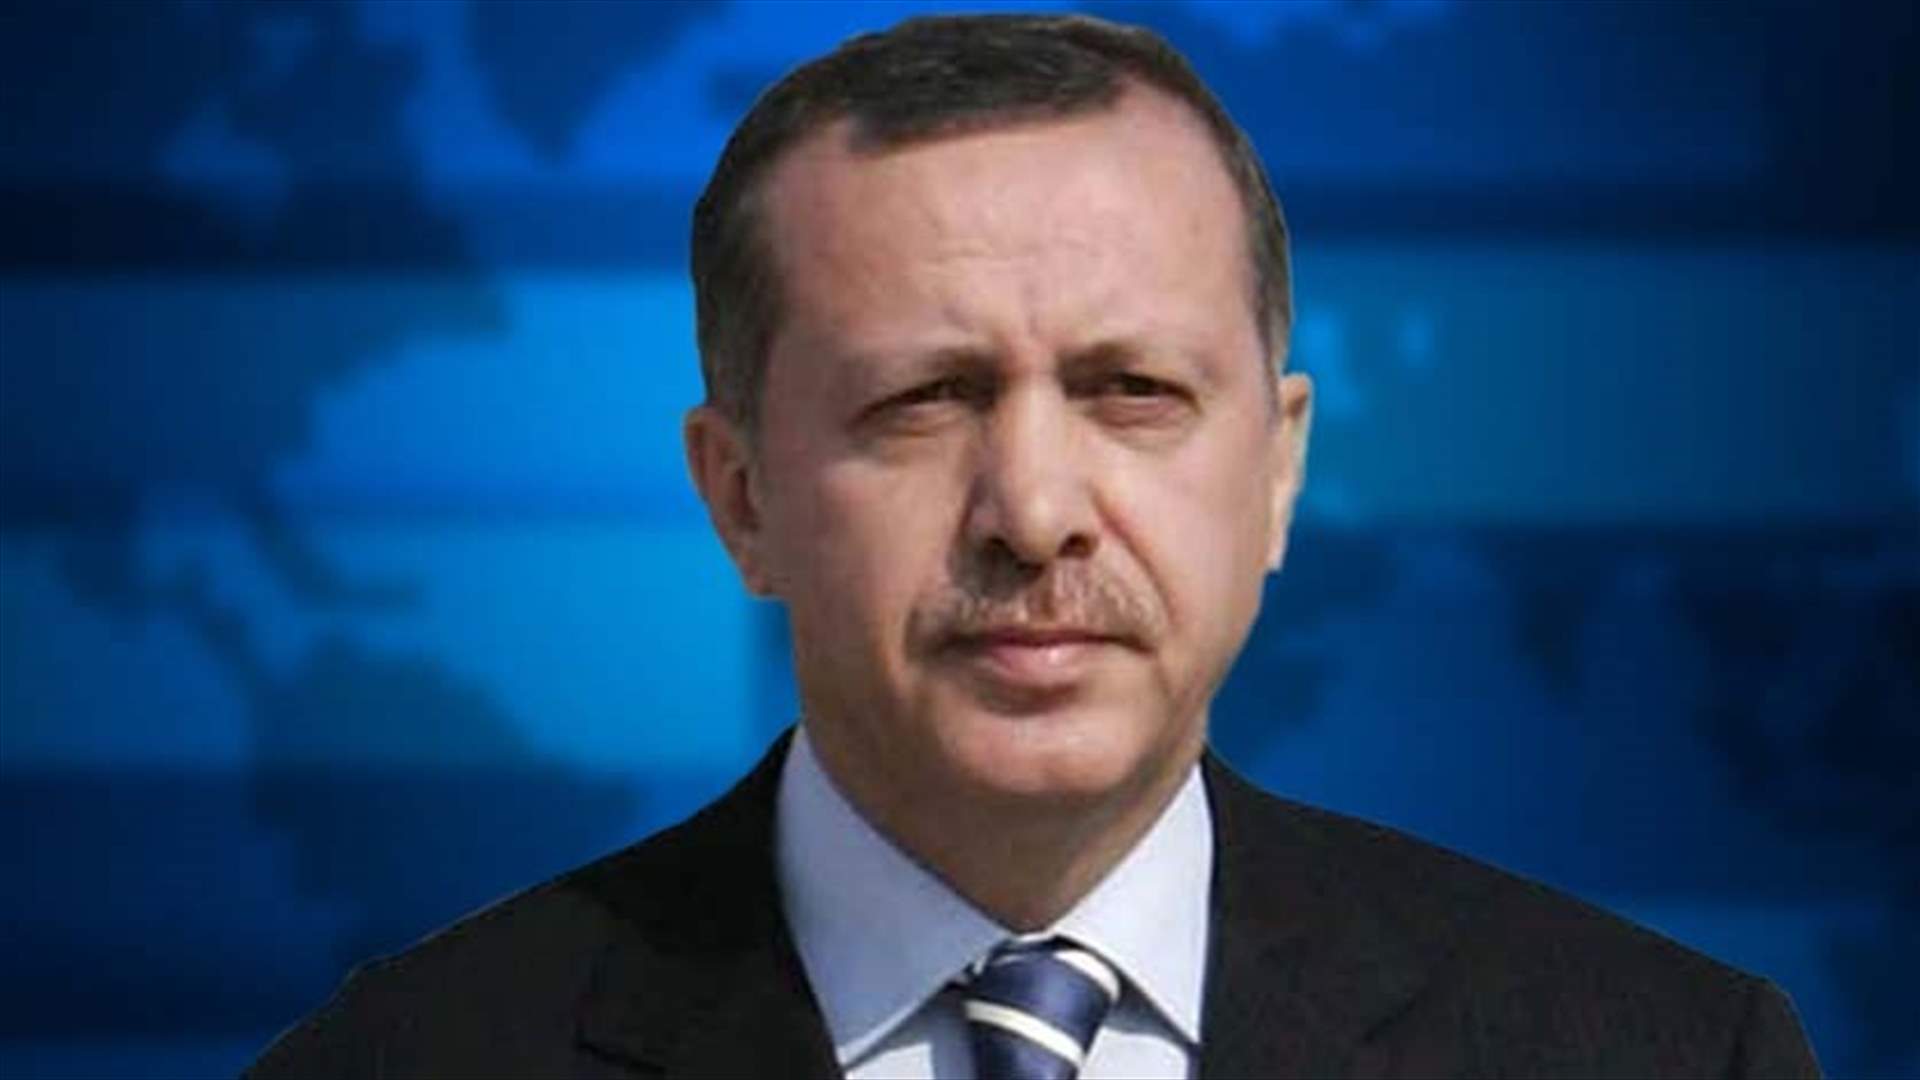 Turkey&#39;s Erdogan rebuffs EU on terrorism law; &quot;we&#39;re going our way, you go yours.&quot;